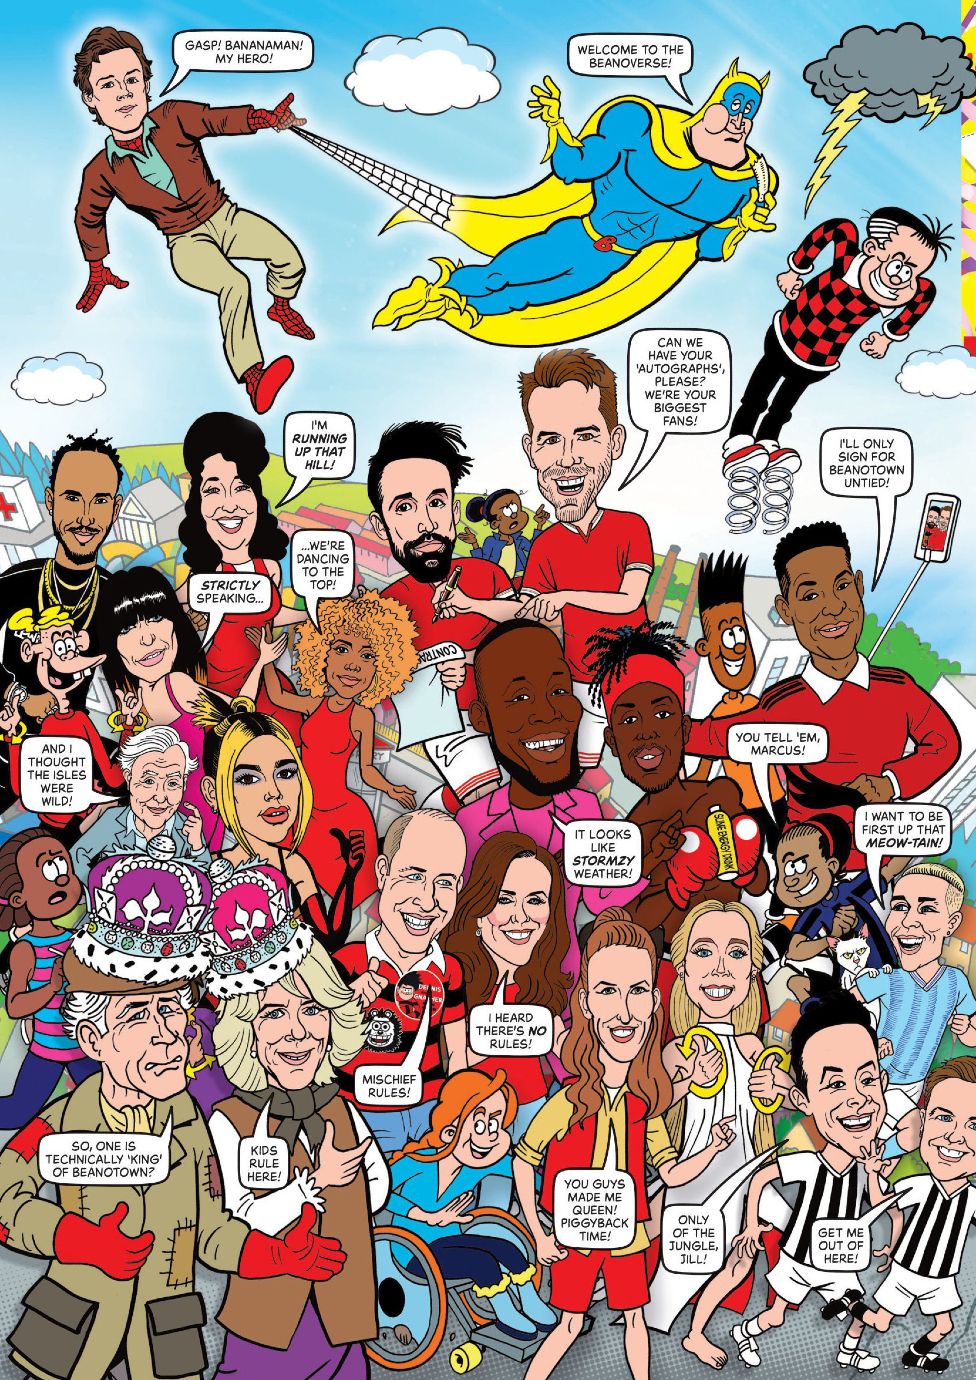 The Beano's special edition depicts a host of famous faces in cartoon form